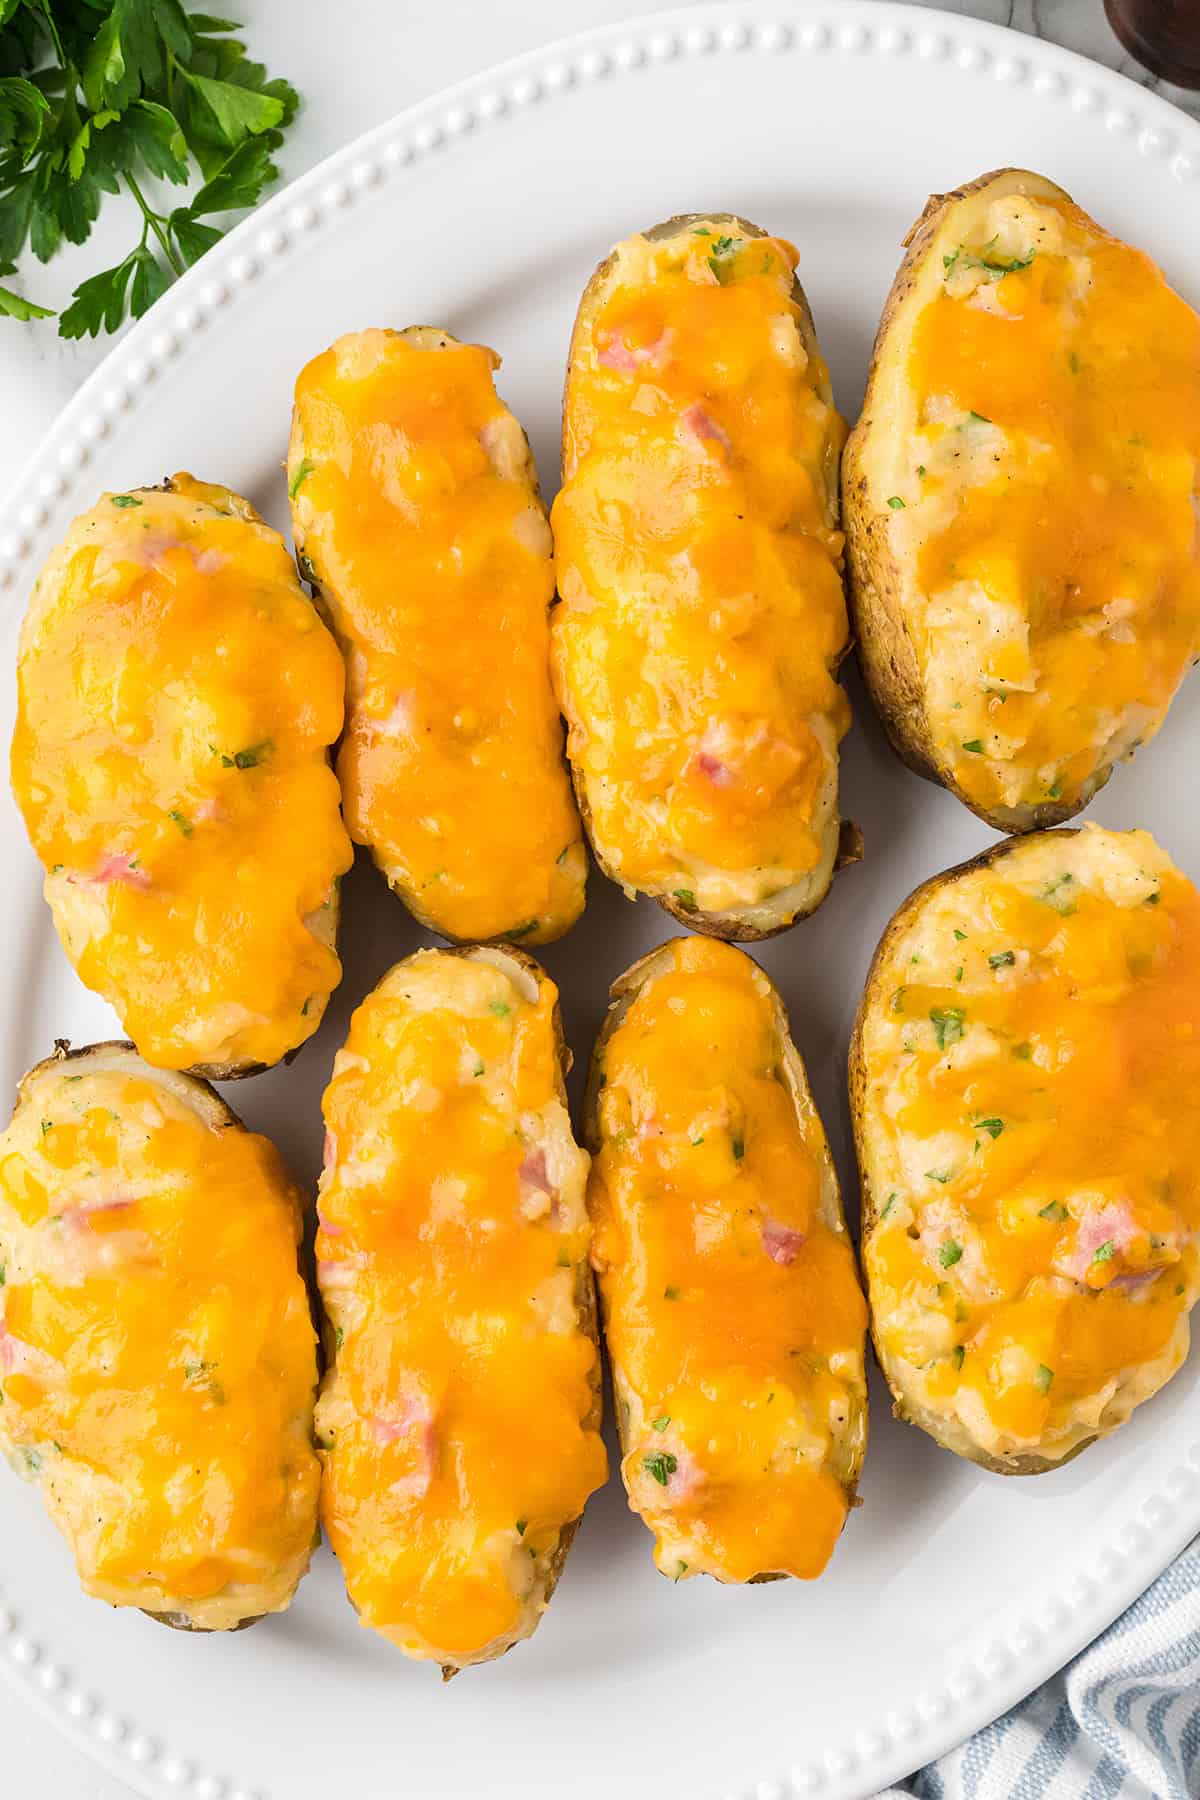 Ham and cheese stuffed potatoes on a white plate.